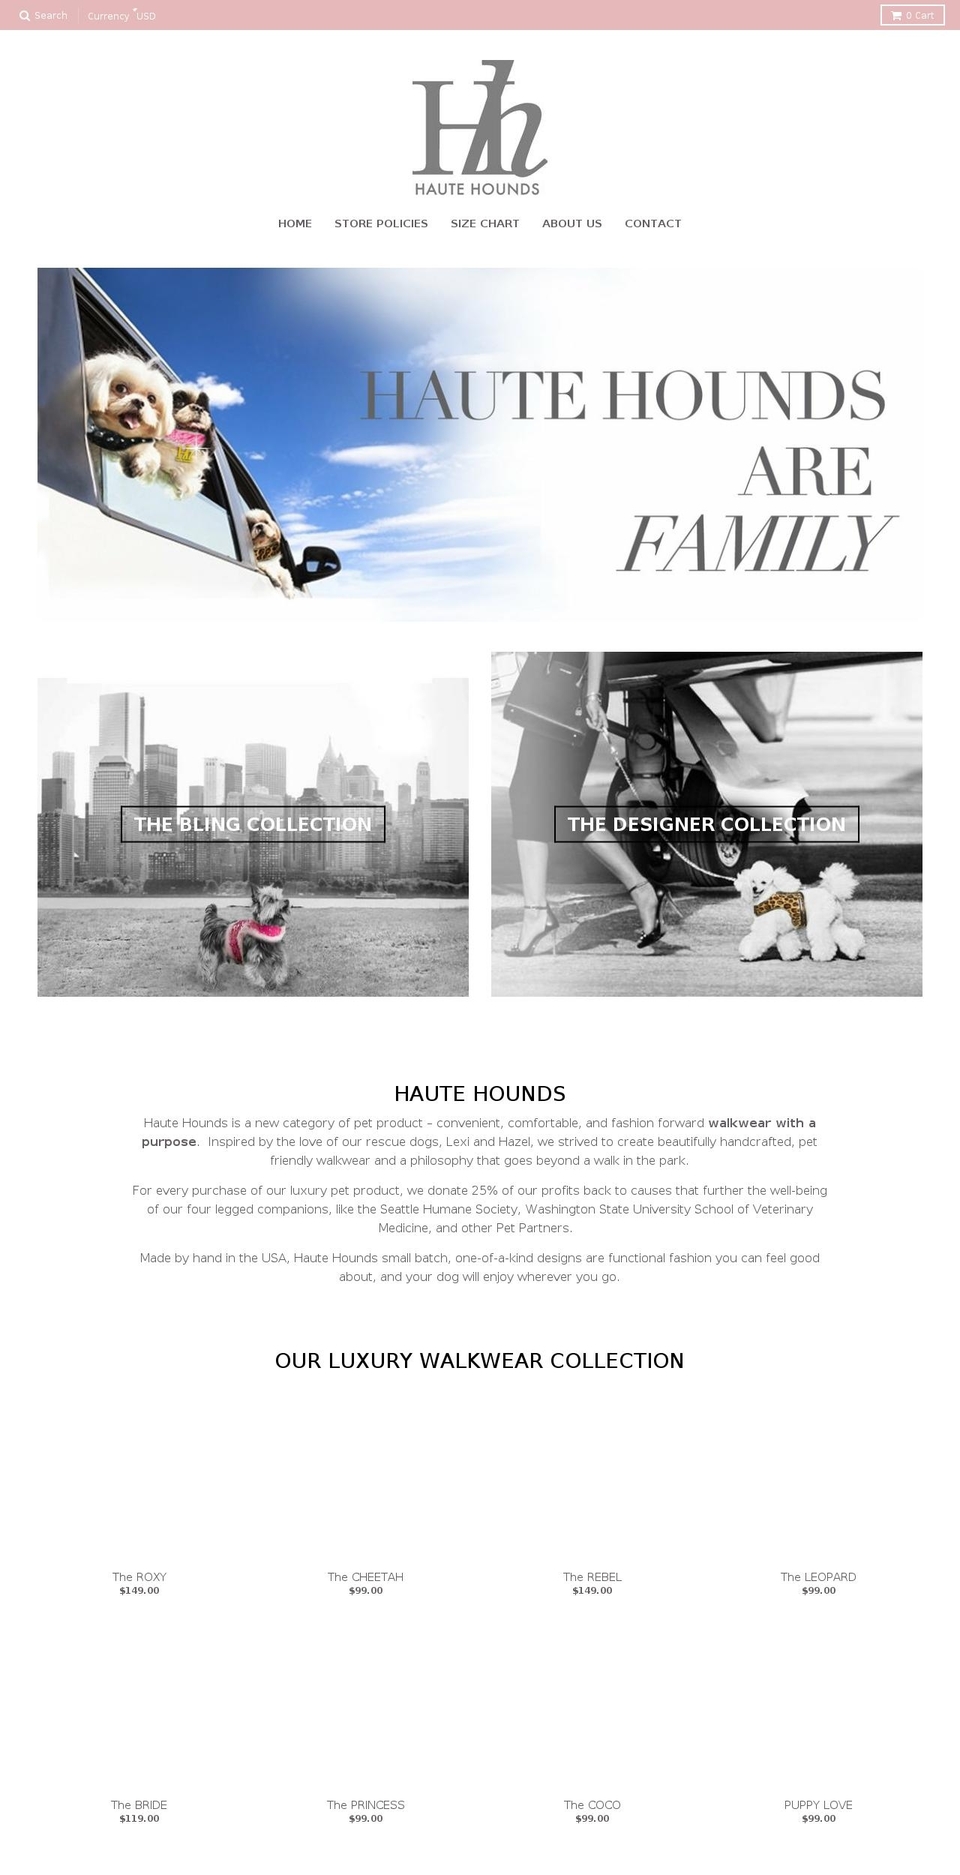 HAUTE HOUNDS NEW PRODUCT LIVE 4-24-18 Shopify theme site example hautehounds.com